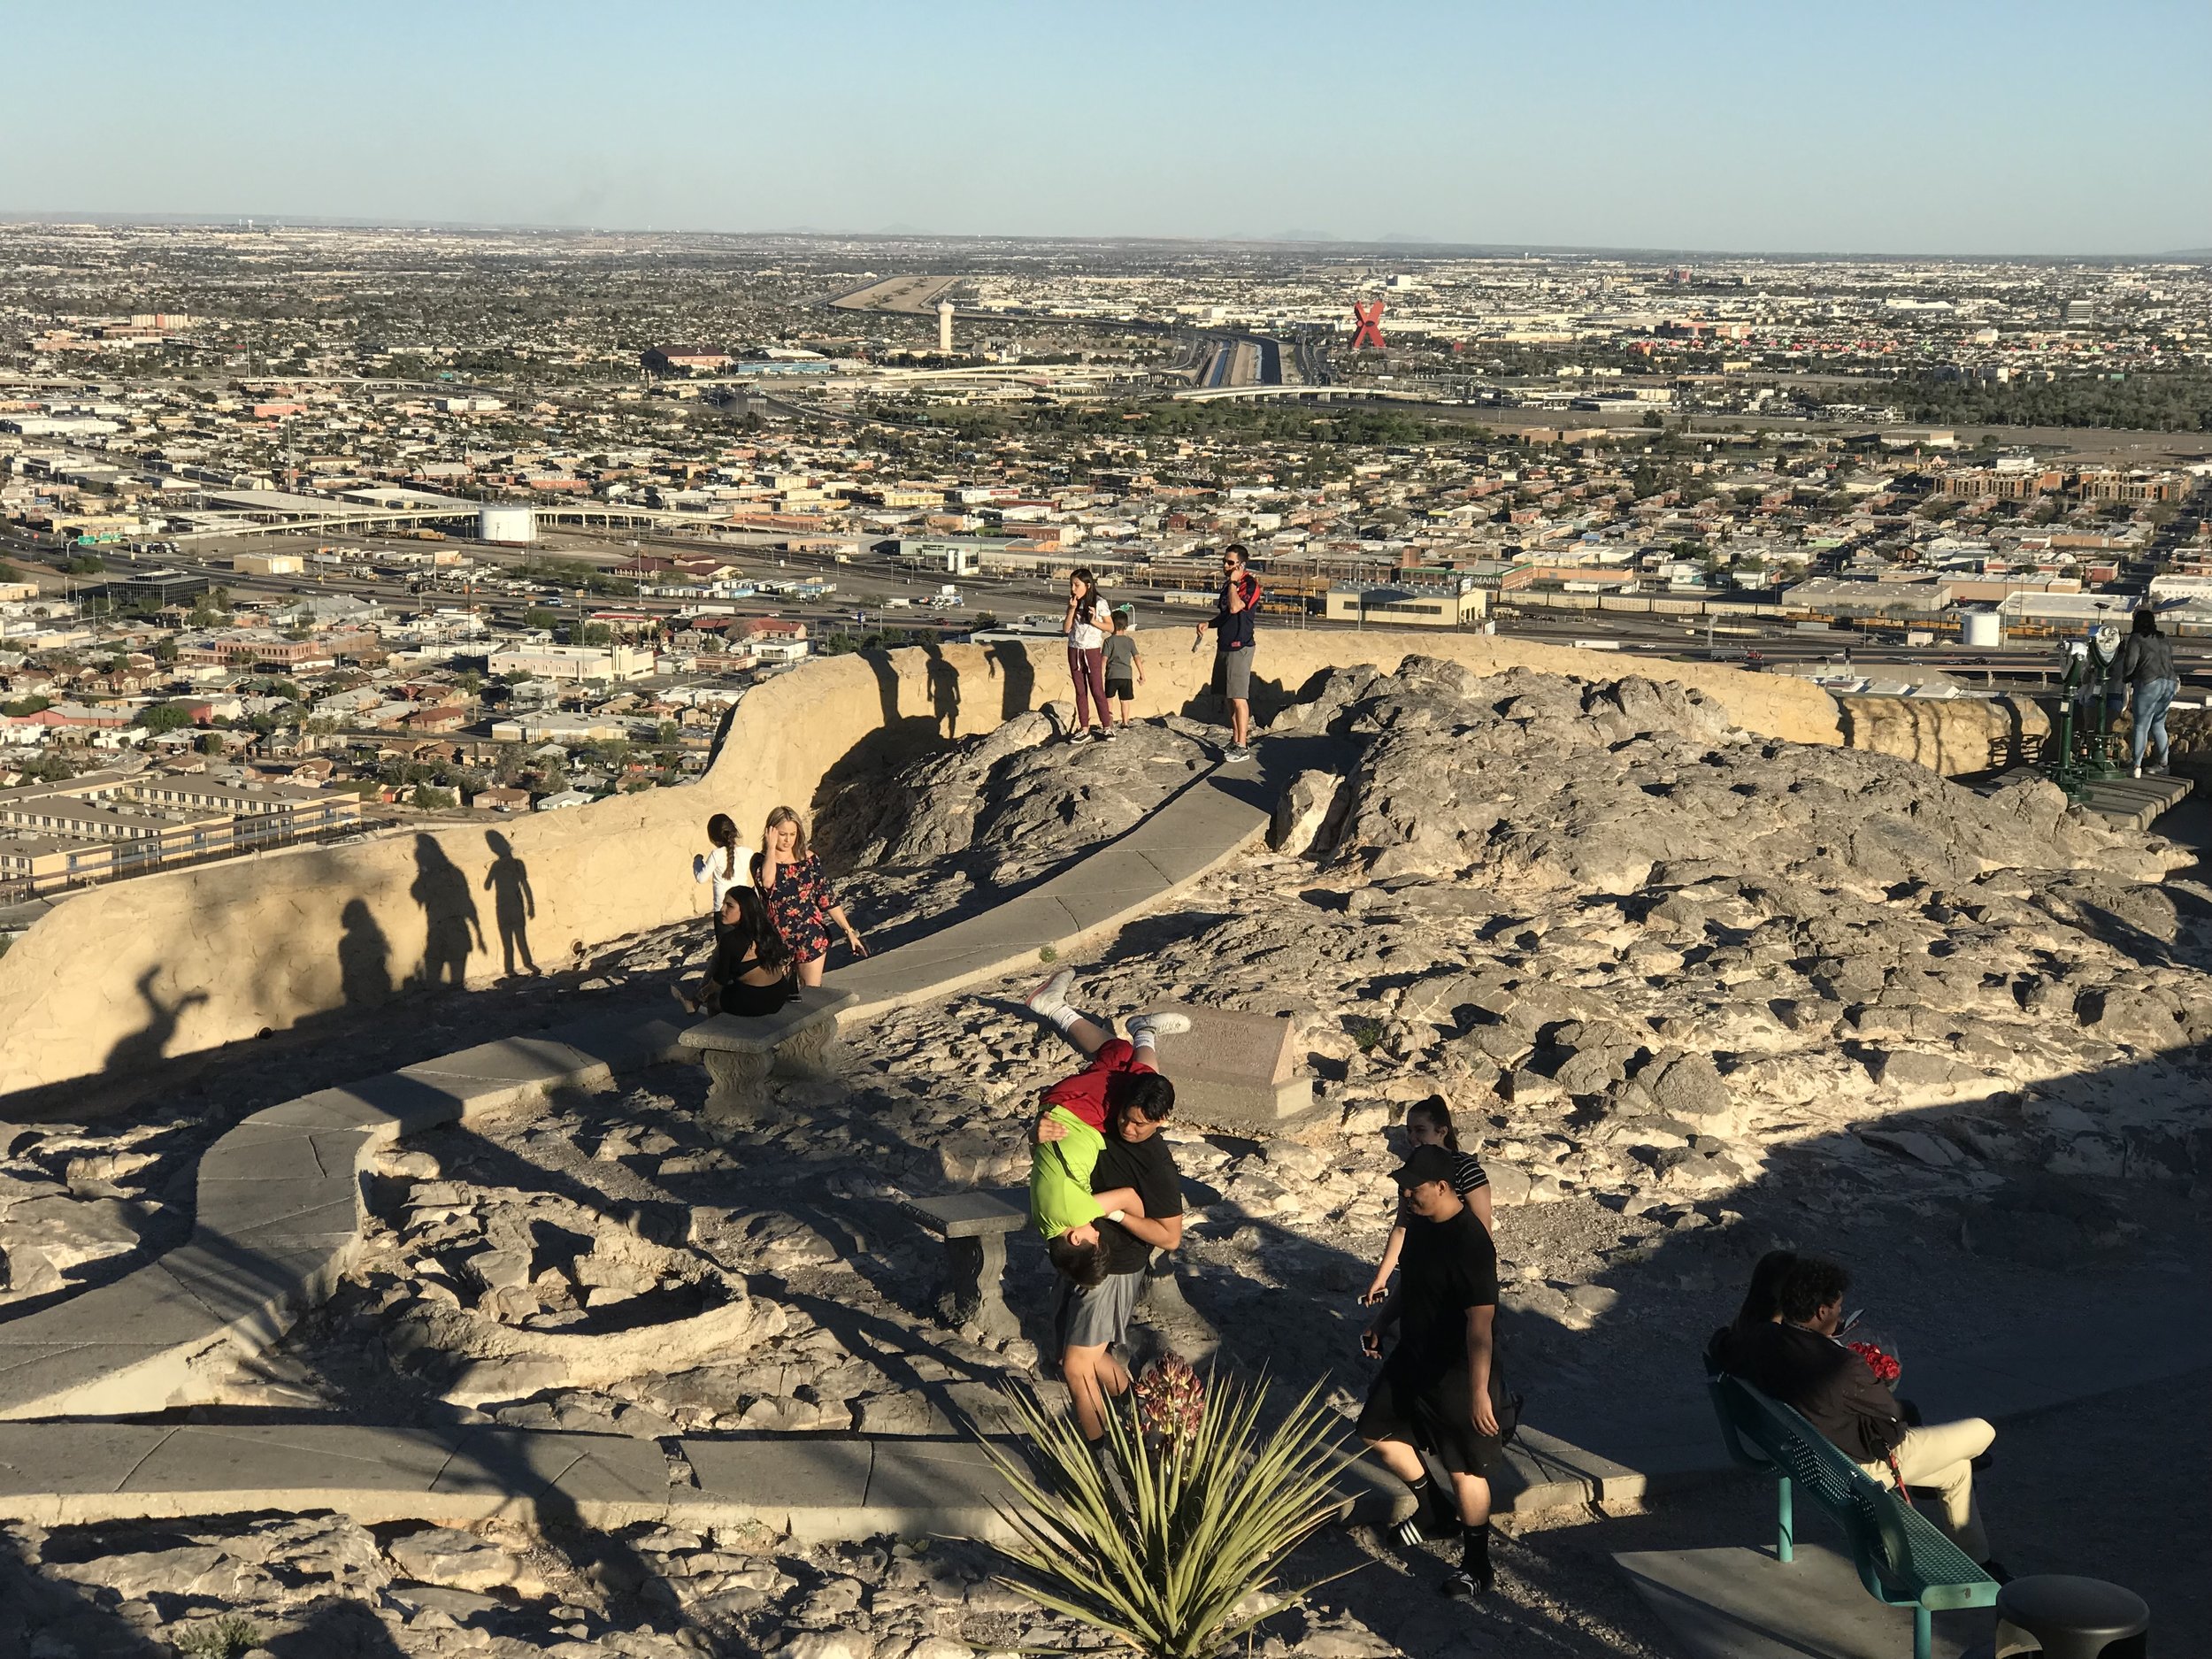  The view of the Rio Grande Valley from the Franklin Mountains north of El Paso. The X-shaped Monumento a la Mexicaneidad is on the Juarez side of the border.      